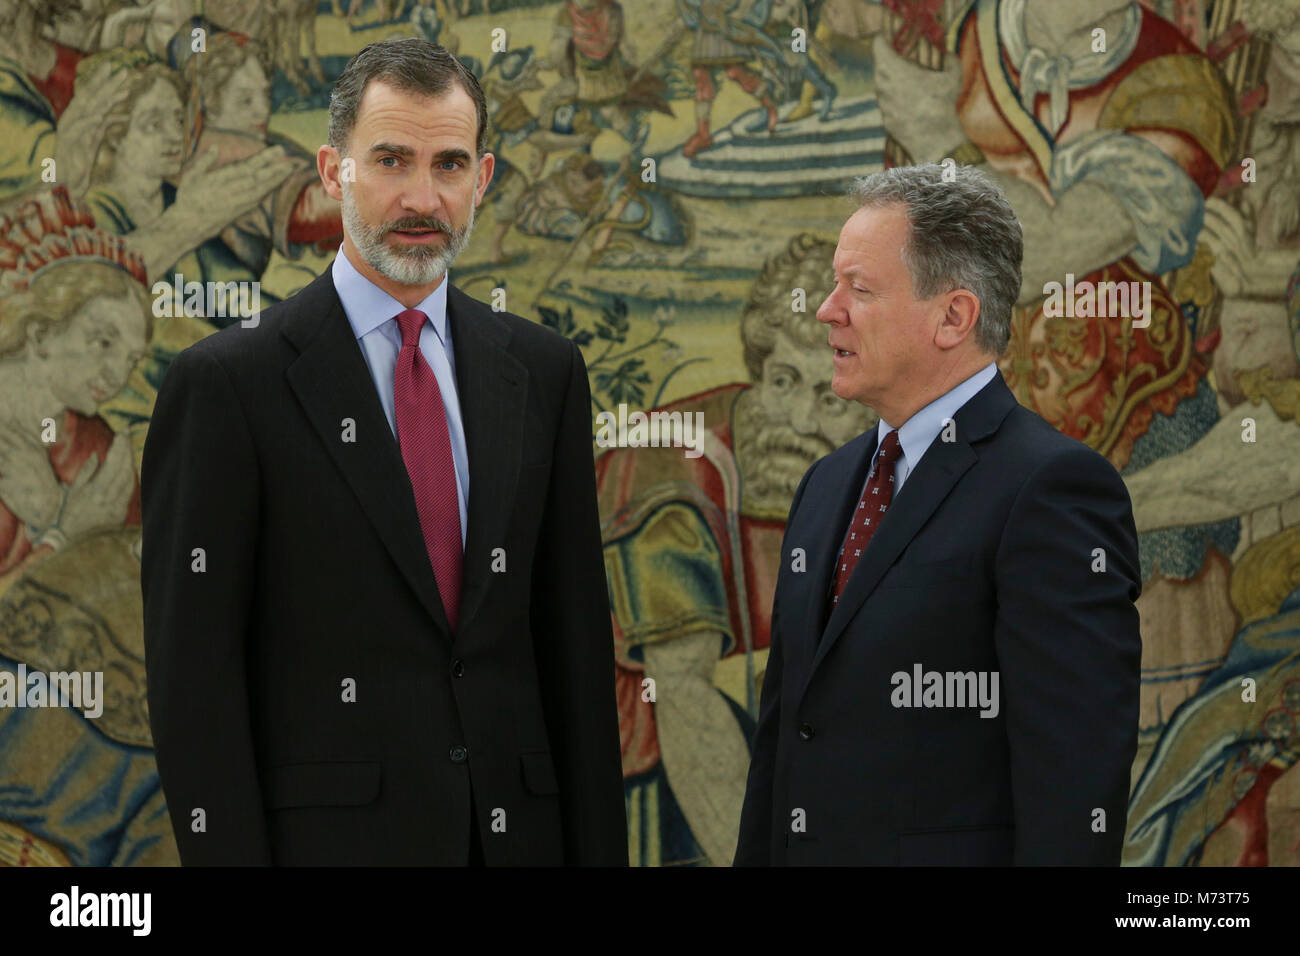 Madrid, Spain. 8th March, 2018. Spanish King Felipe VI with David Beasley director of the world food program on Thursday 8th March 2018, in Madrid. Credit: Gtres Información más Comuniación on line, S.L./Alamy Live News Stock Photo